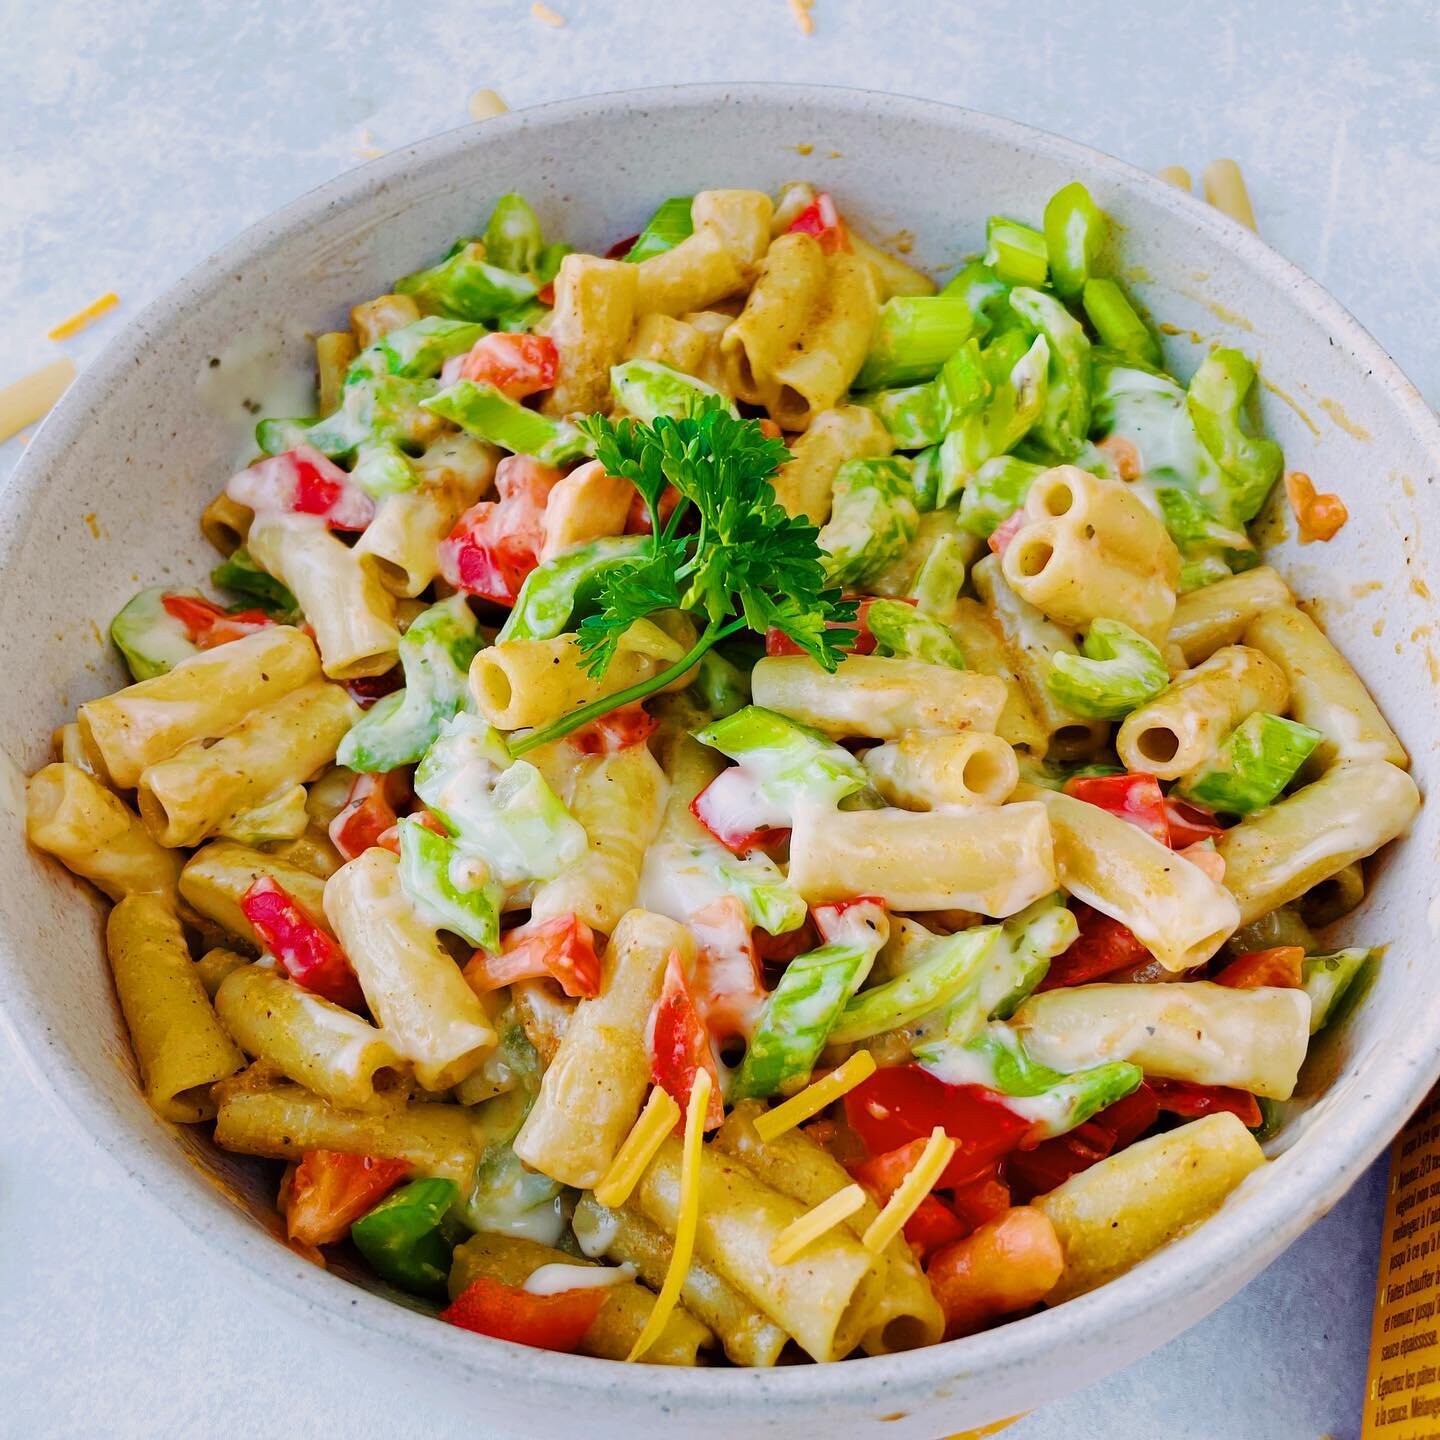 Add a few additional ingredients to Boosh Mac &amp; Cheese to make this delicious Cheesy Macaroni Salad. A very popular side dish for dinner, this salad is sure to please! 😉
 
Ingredients:

🧀  1 box of Boosh Mac and Cheese
🫑 &frac12; cup chopped r